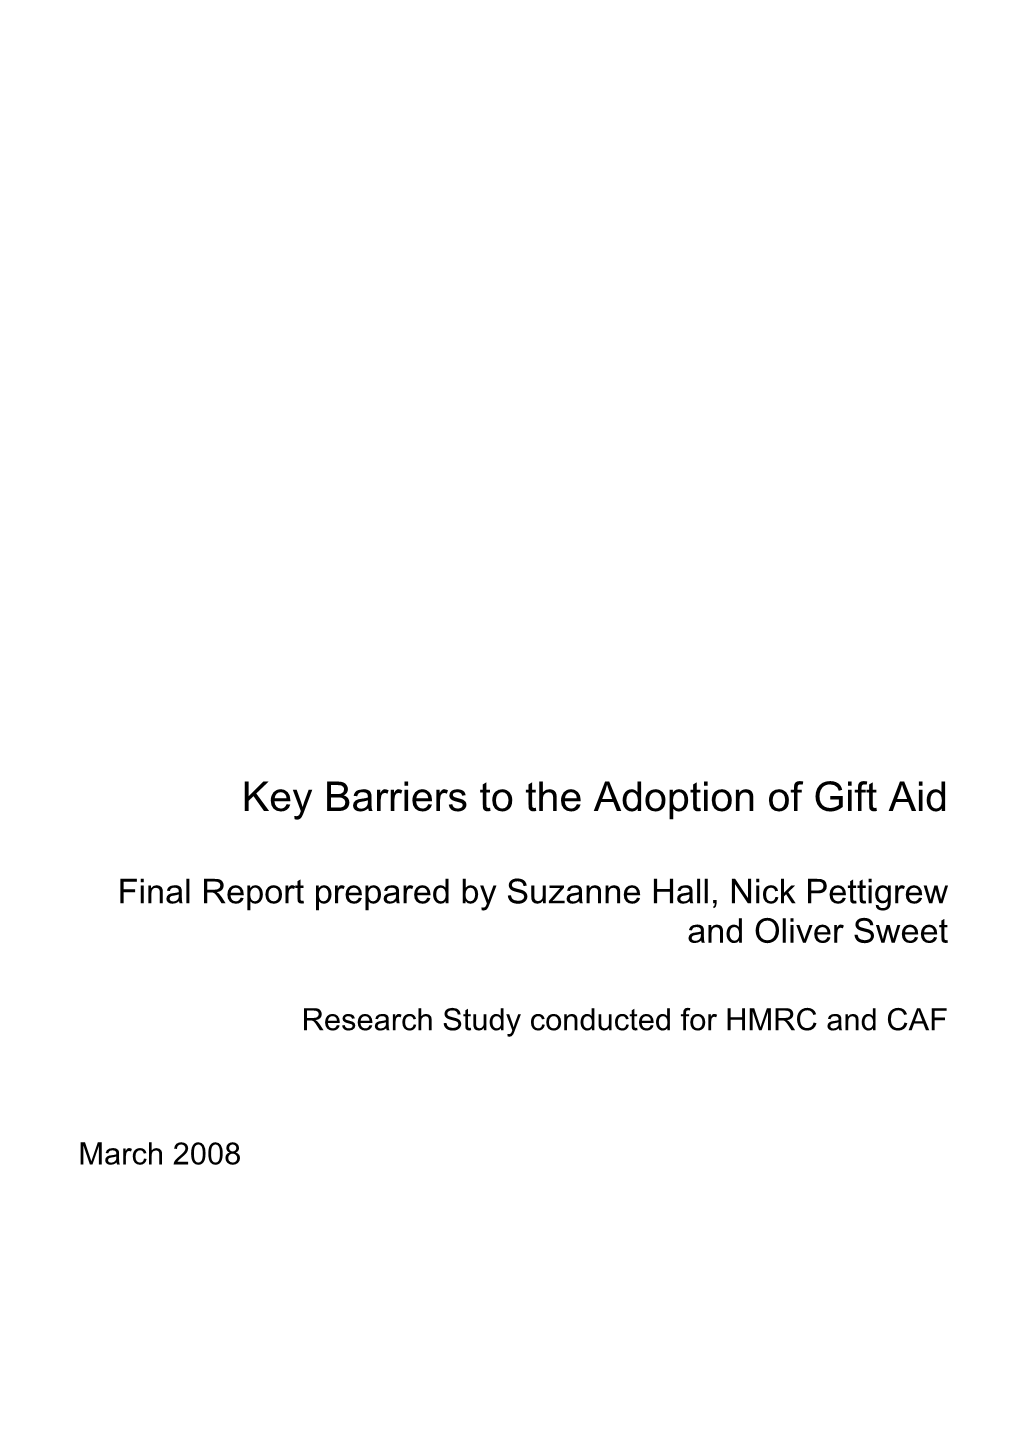 Download the Gift Aid Report